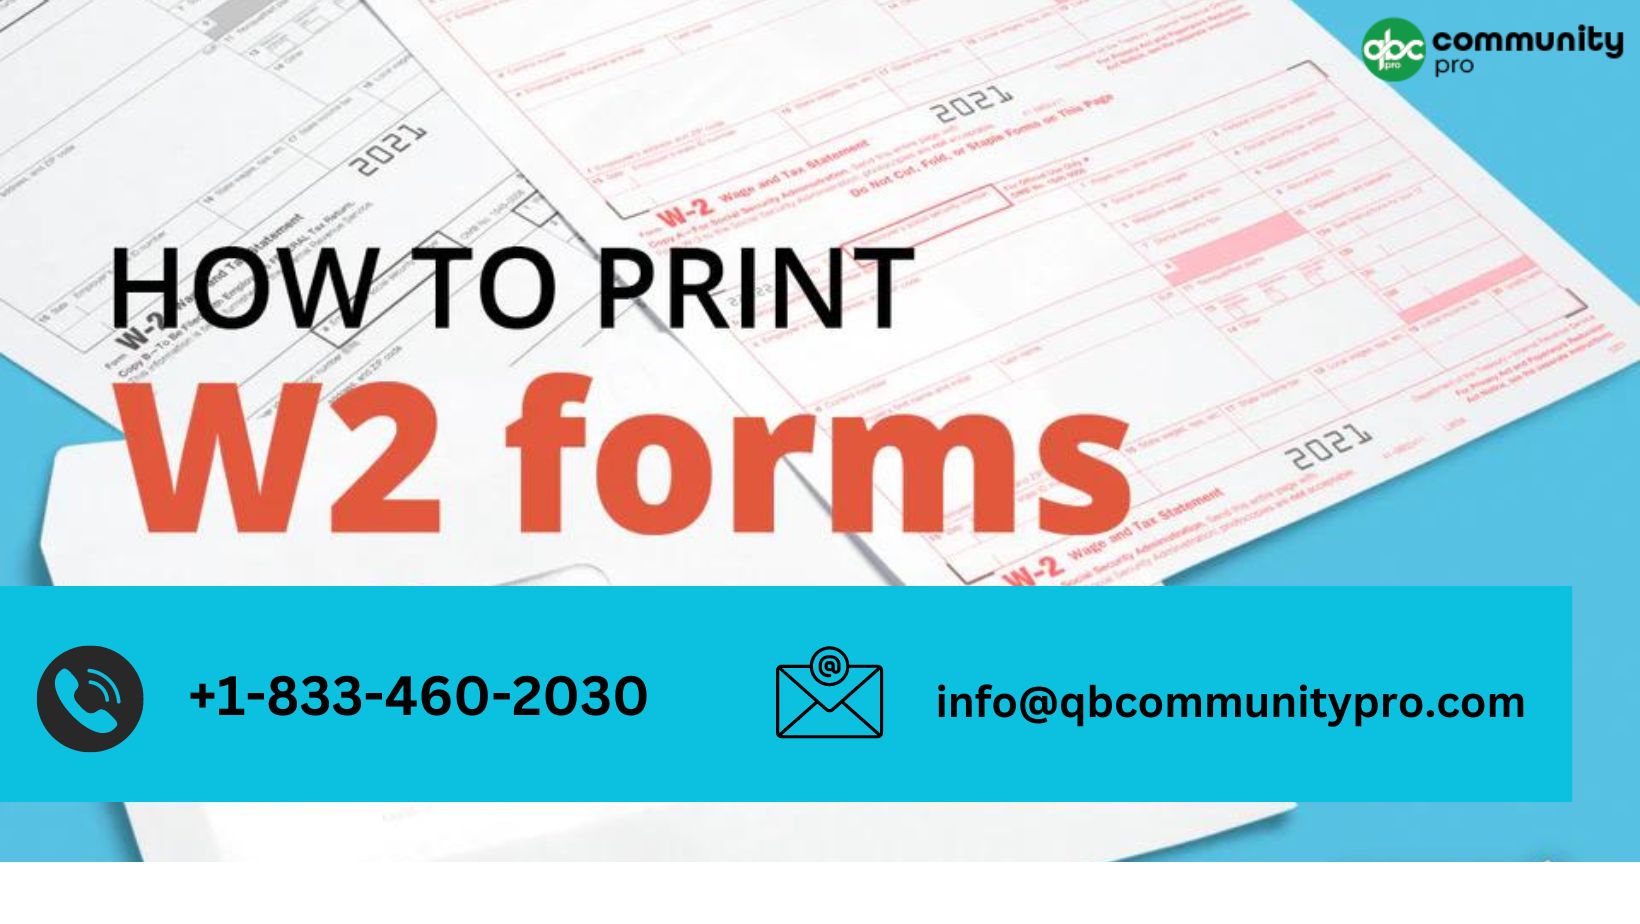 Reprint W2 Forms in QuickBooks: A Step-by-Step Guide